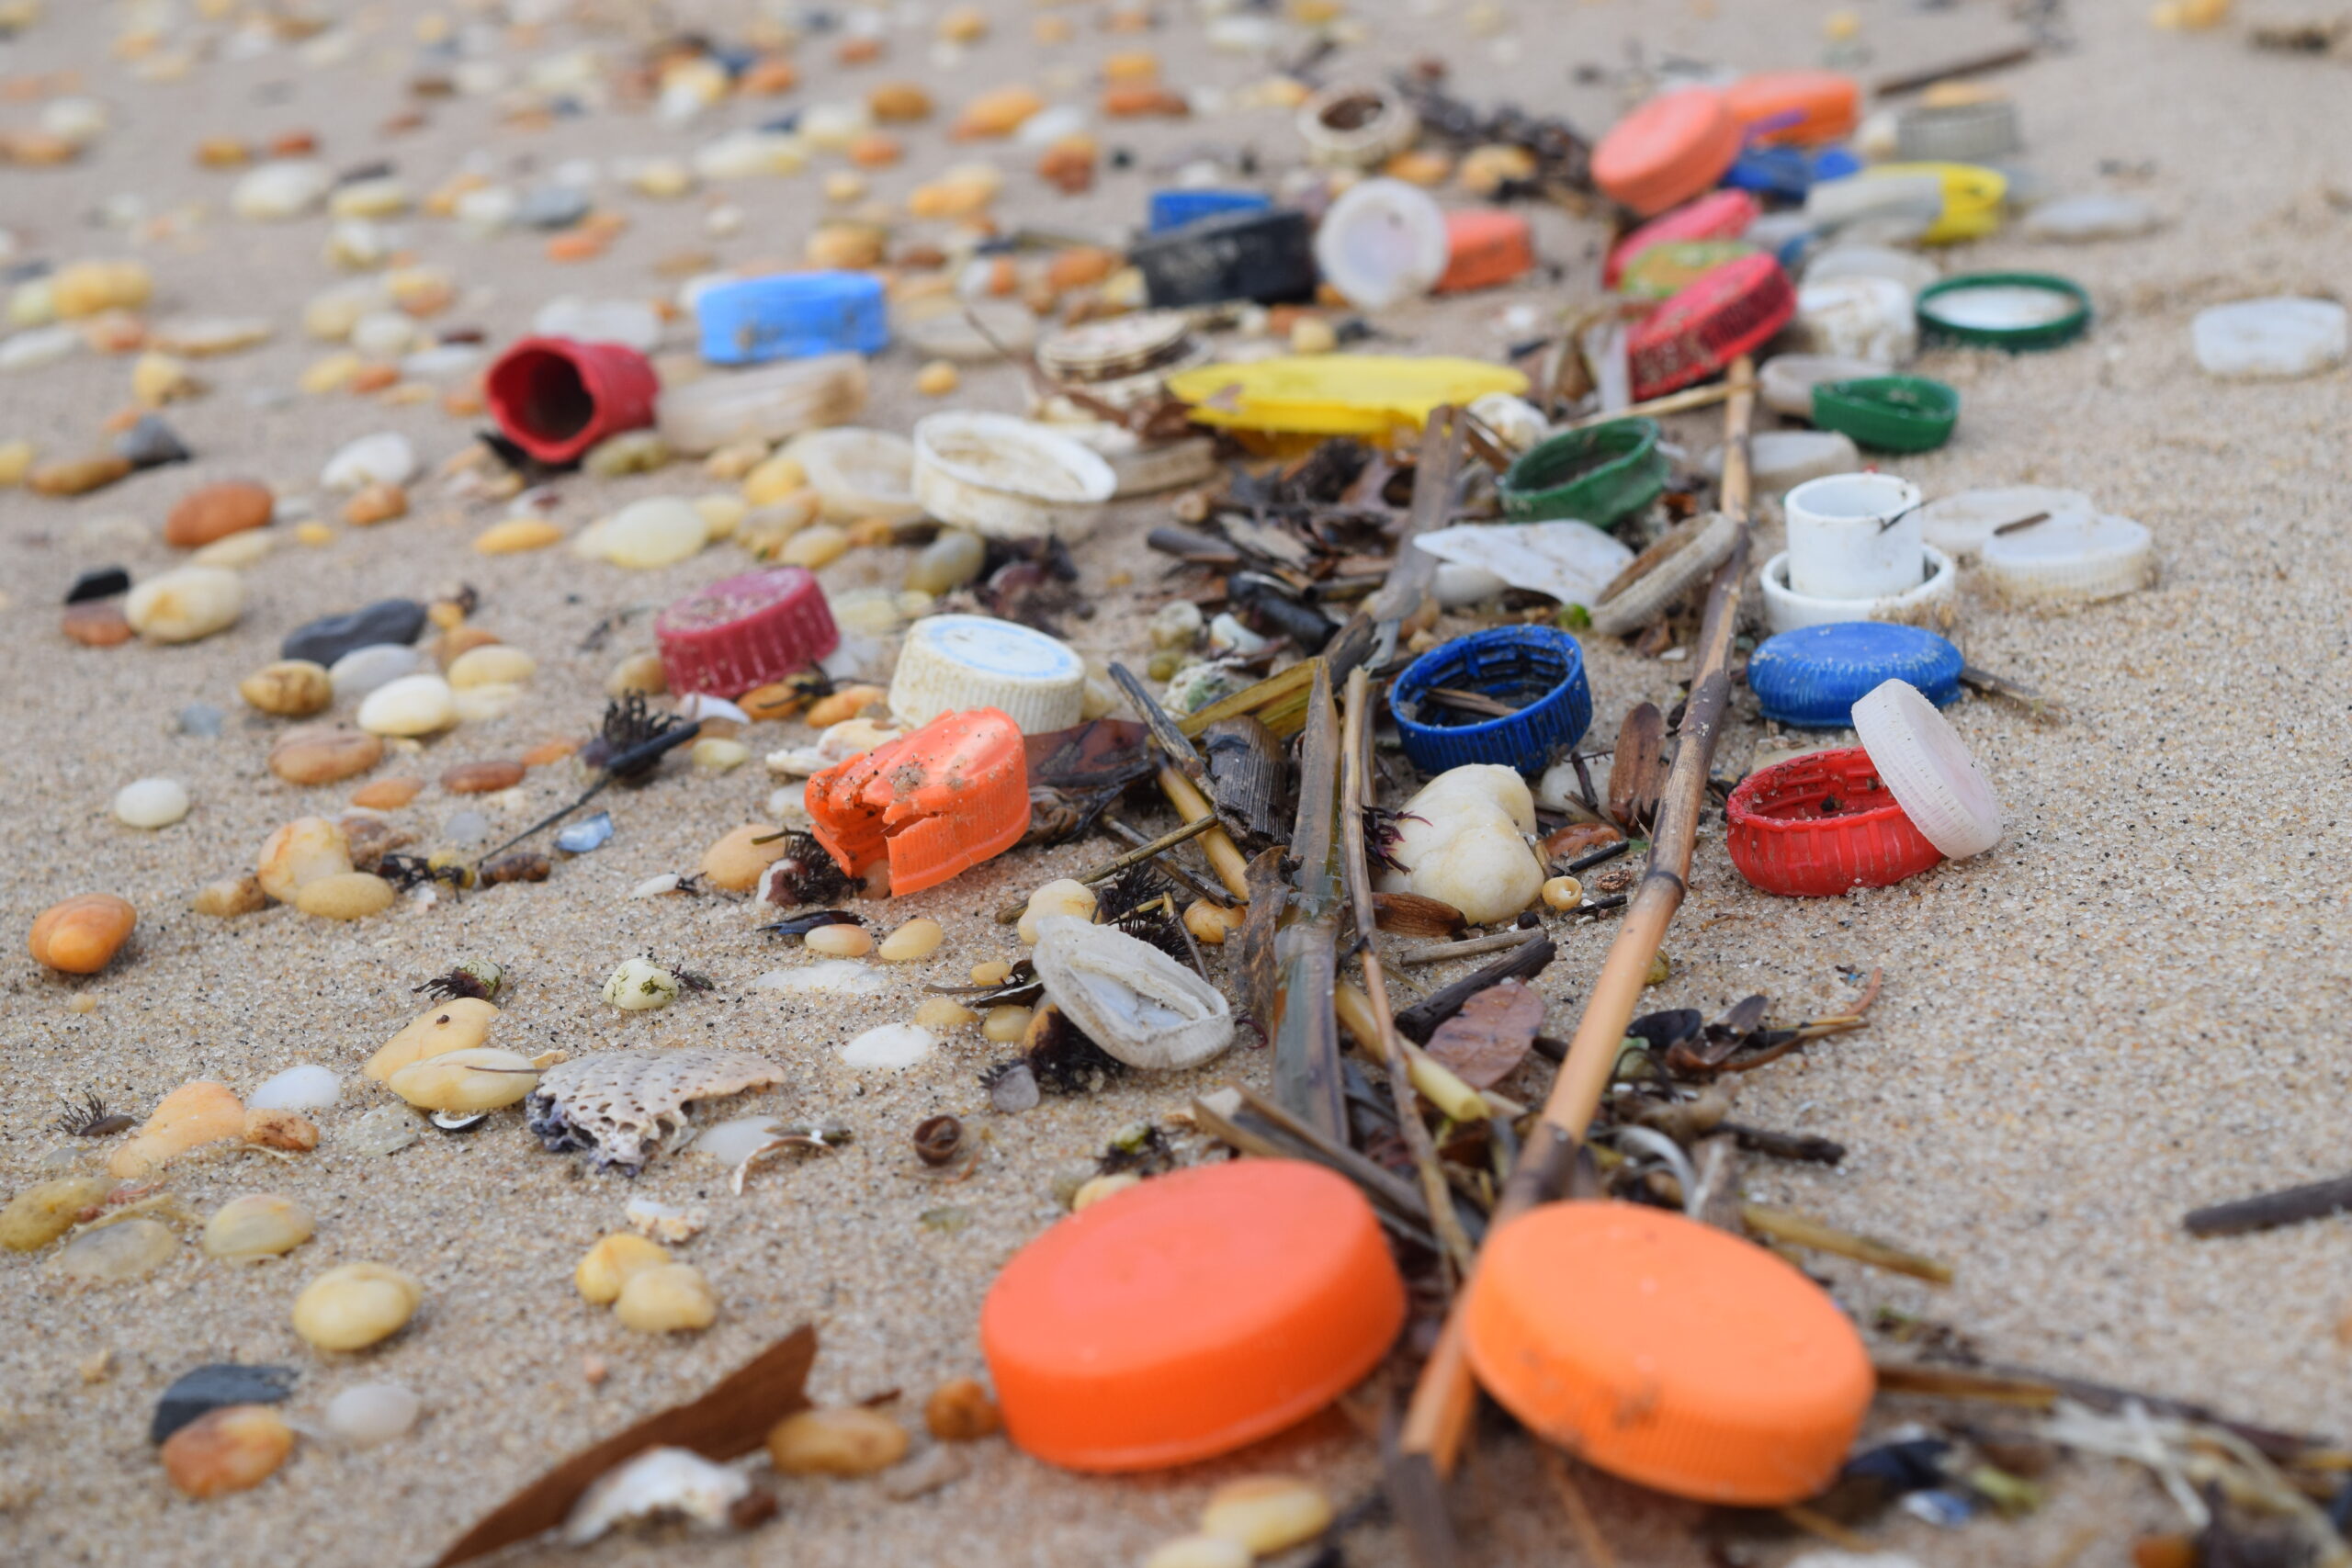 Close-up of numerous colorful plastic bottle caps on sand next to rocks and shells